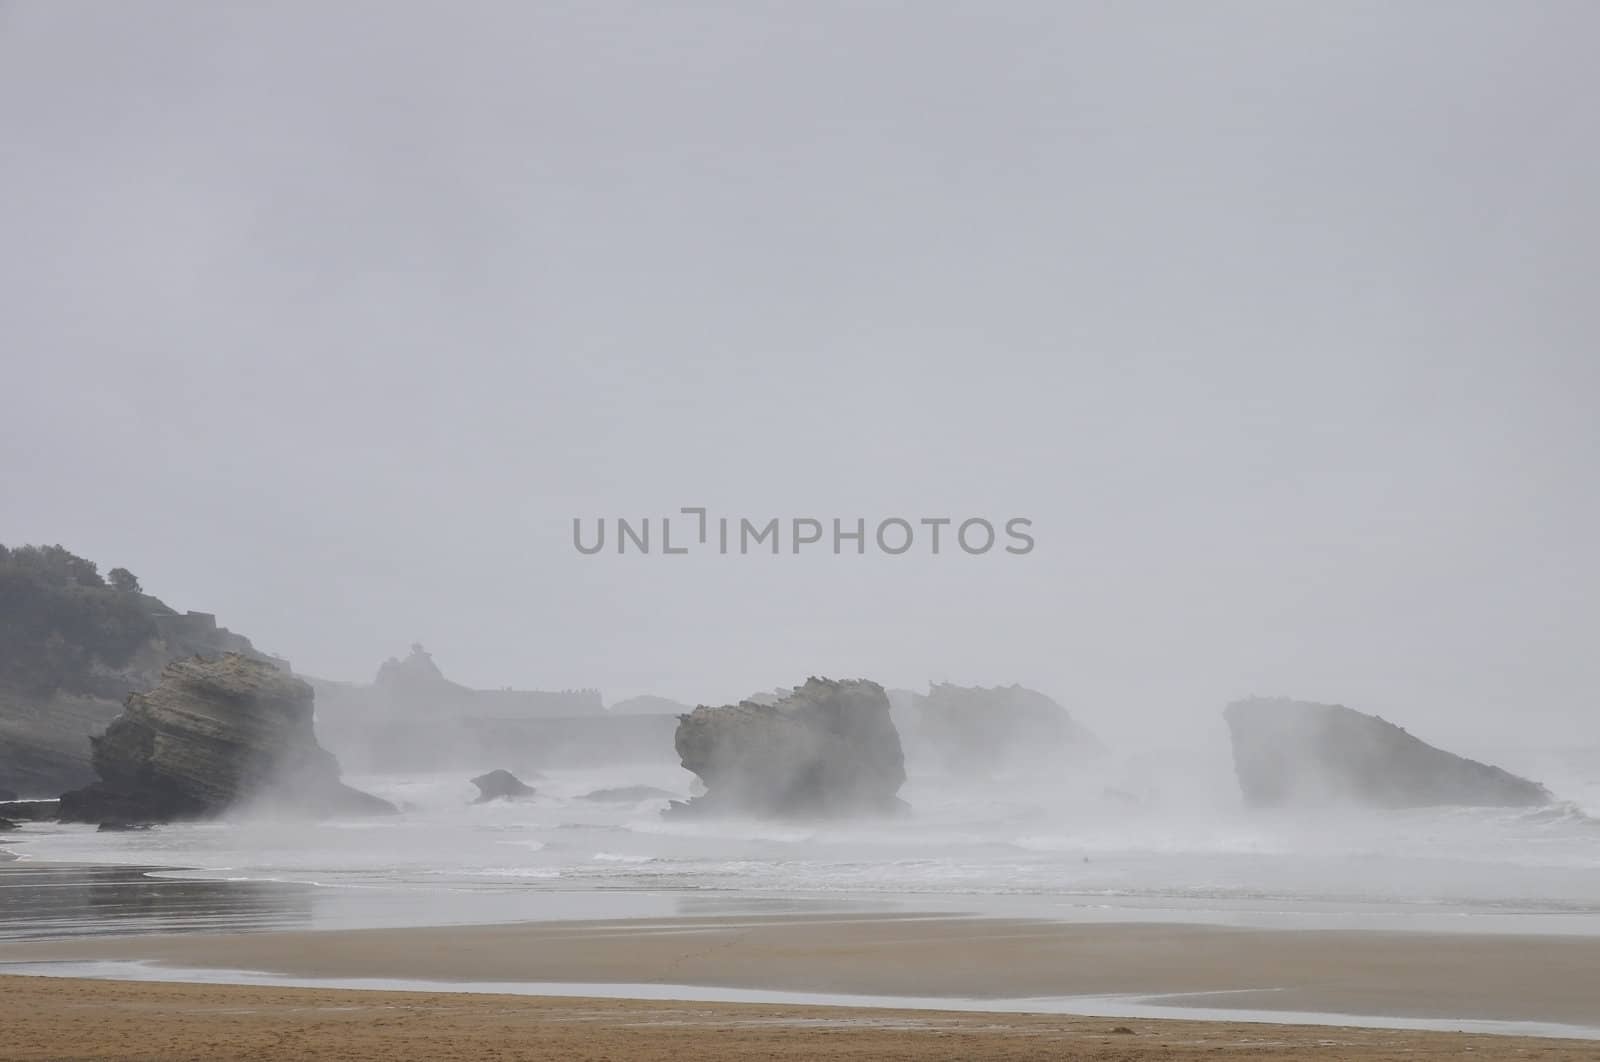 Rocks and beach under the rain into the mist by shkyo30